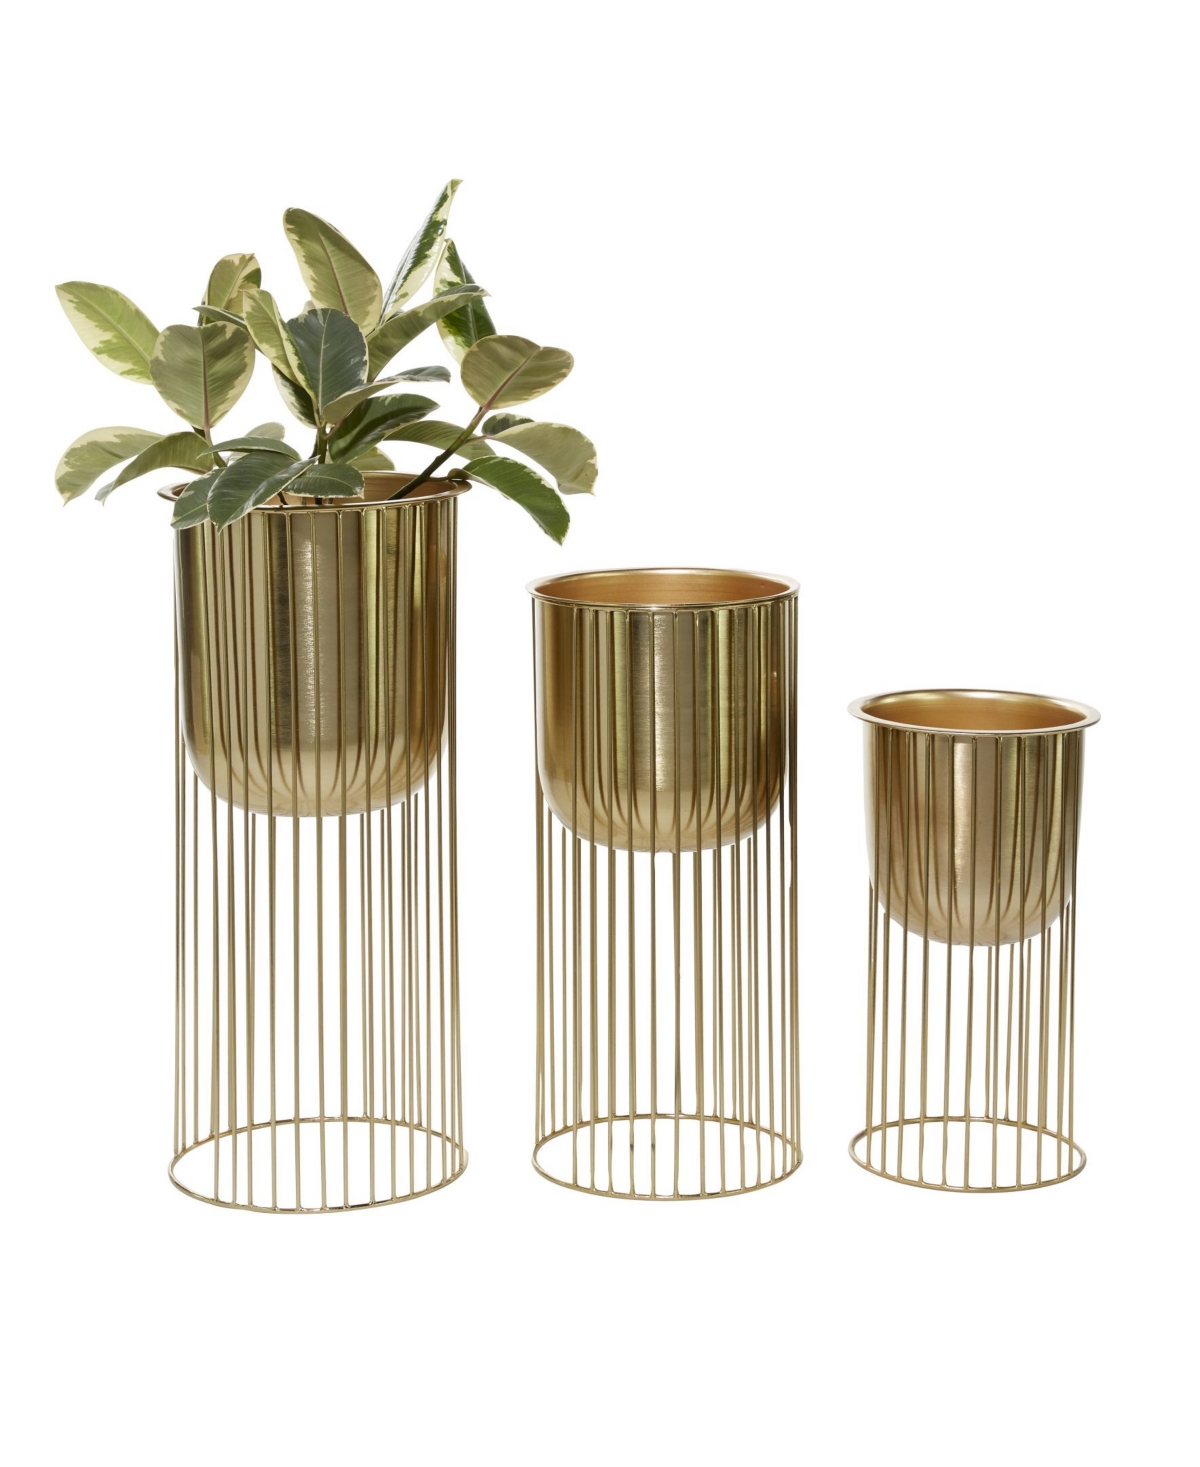 Large Eclectic Metal Planters with Stands, Set of 3 - Gold-tone